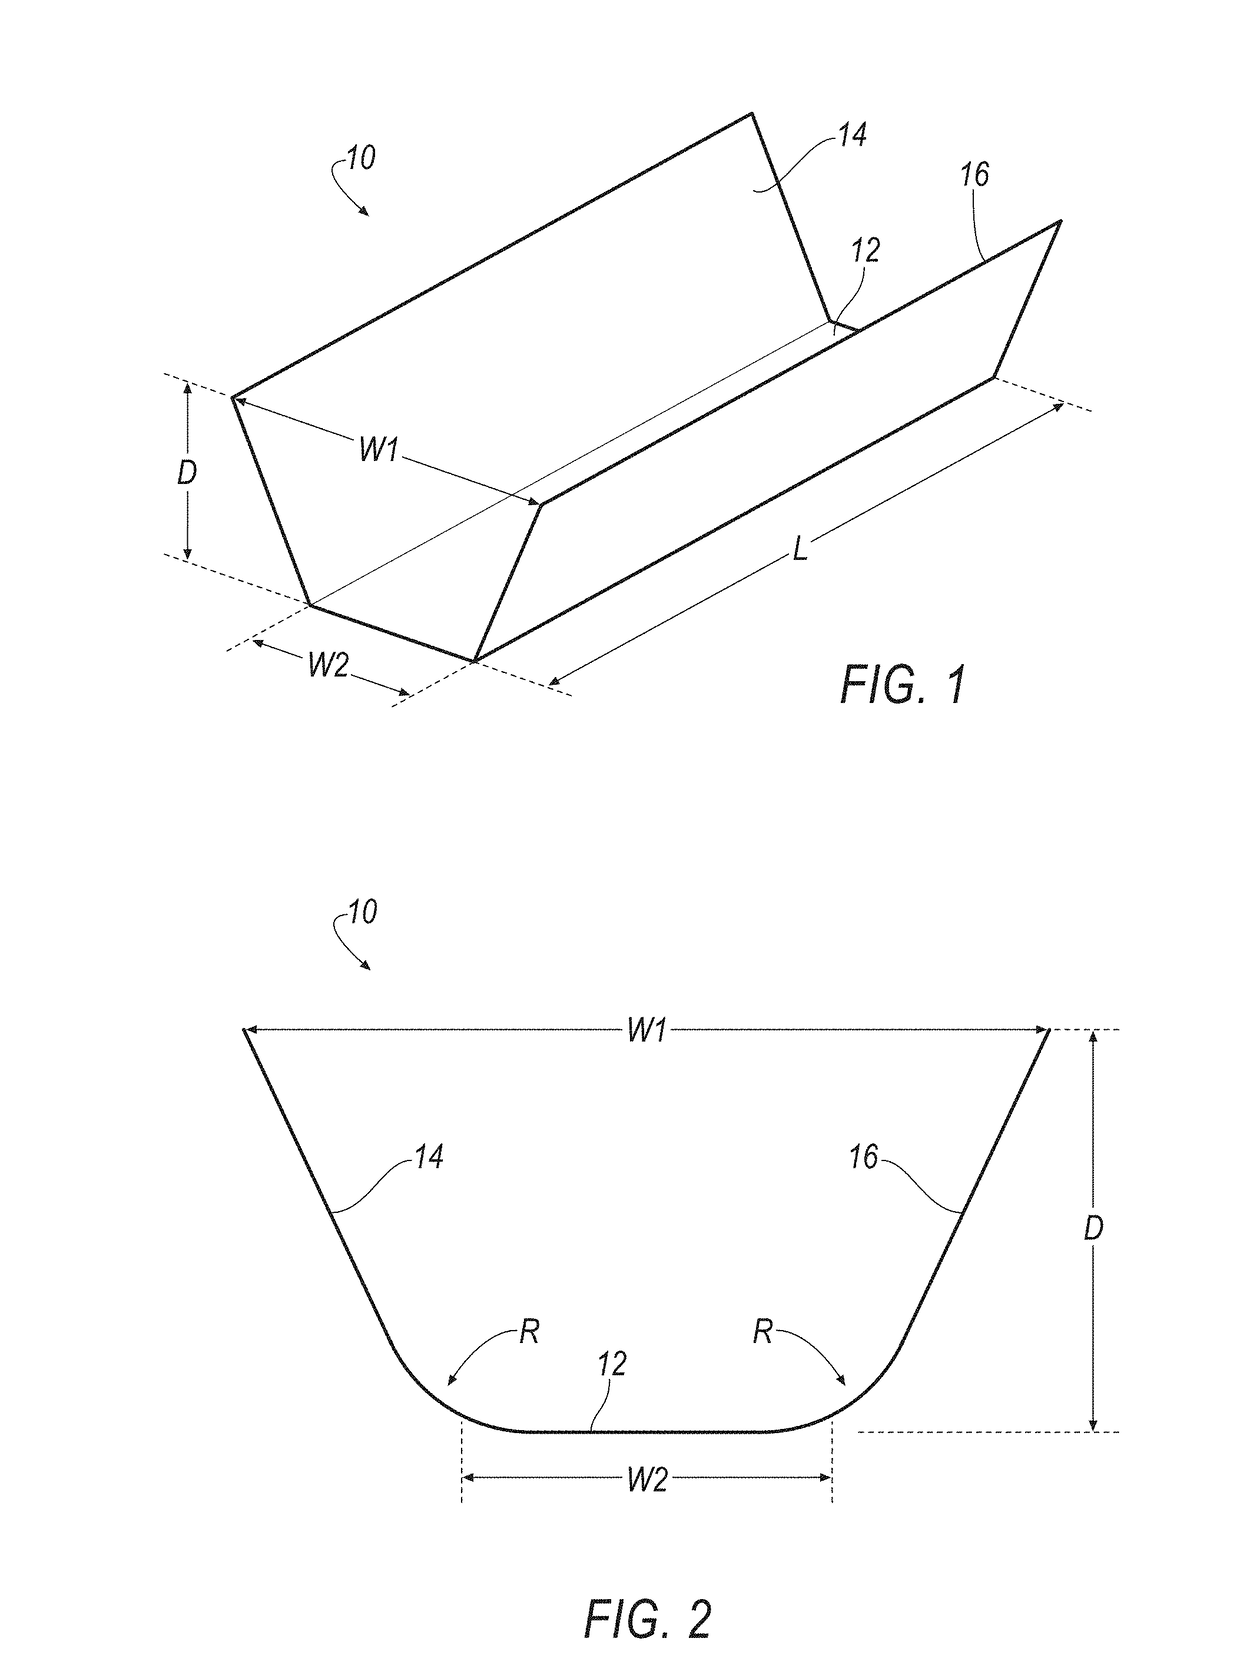 Method of non-destructive testing a cutting insert to determine coating thickness